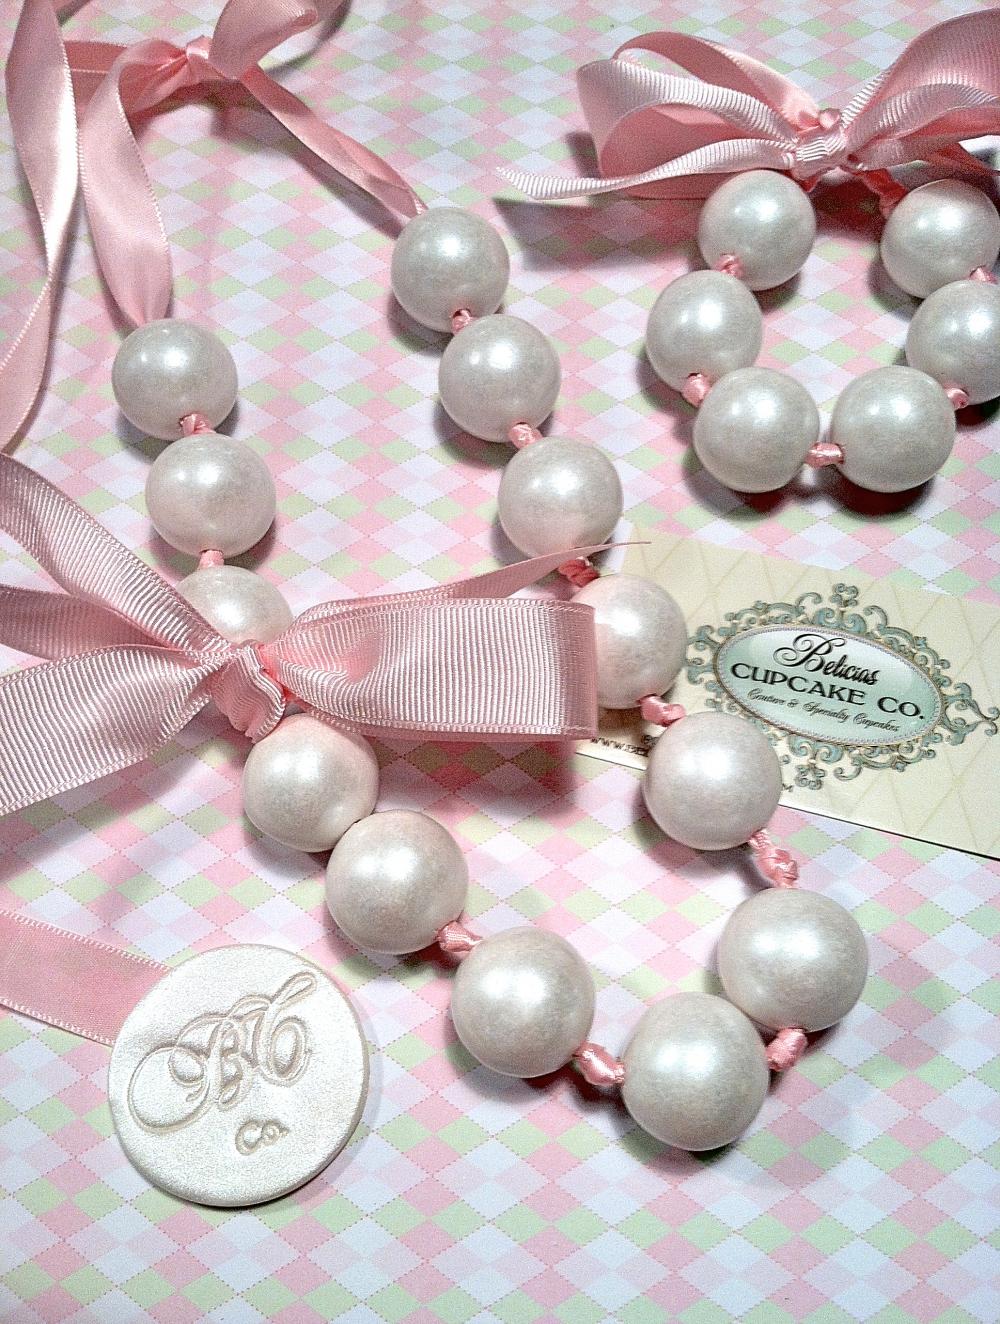 Gumball Necklace Couture Pearls "edible", These Shabby Chic's Are Great For Party Favors For Birthdays, Baby